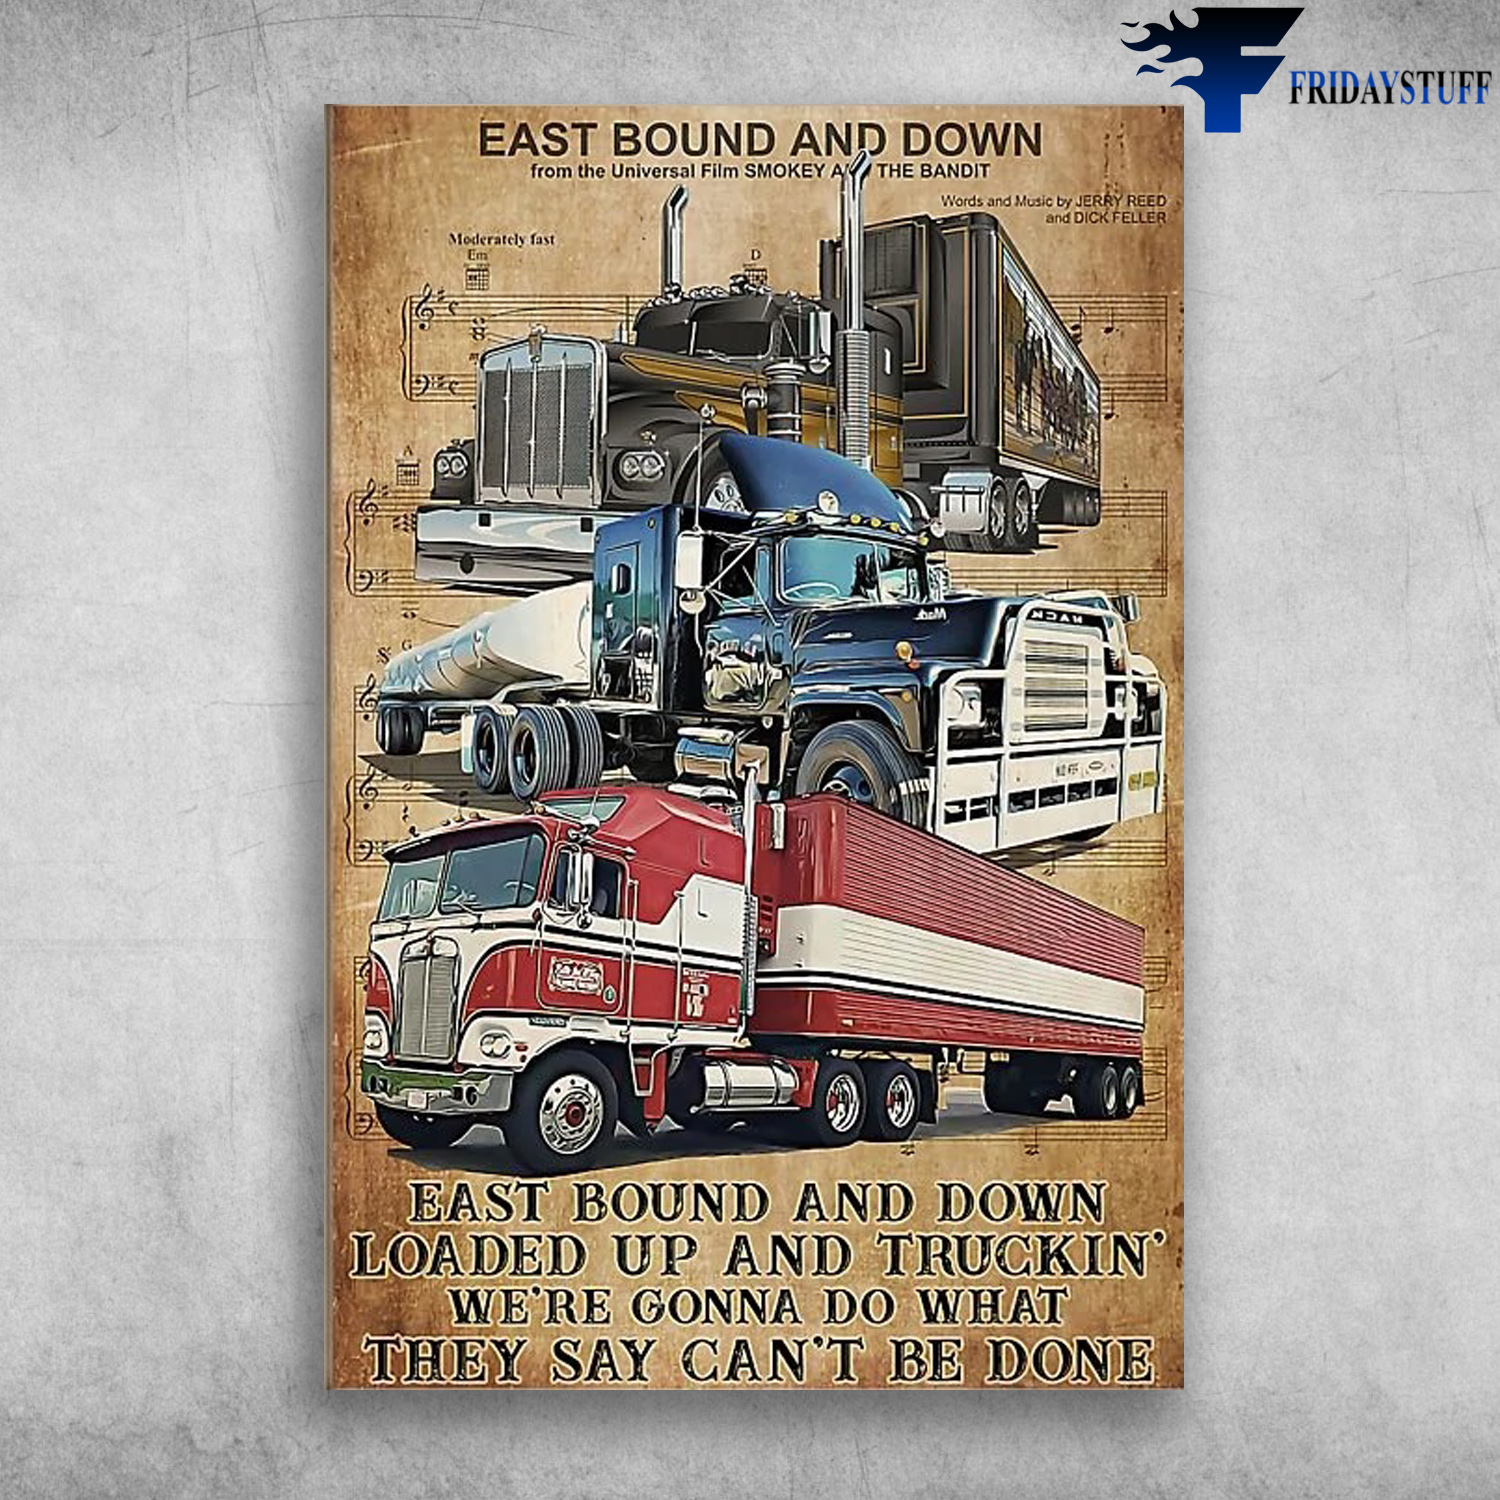 The Truck - East Bound And Down, East Bound And Down, Loaded Up And Truckin, We're Gonna Do That, They Say Can't Be Done